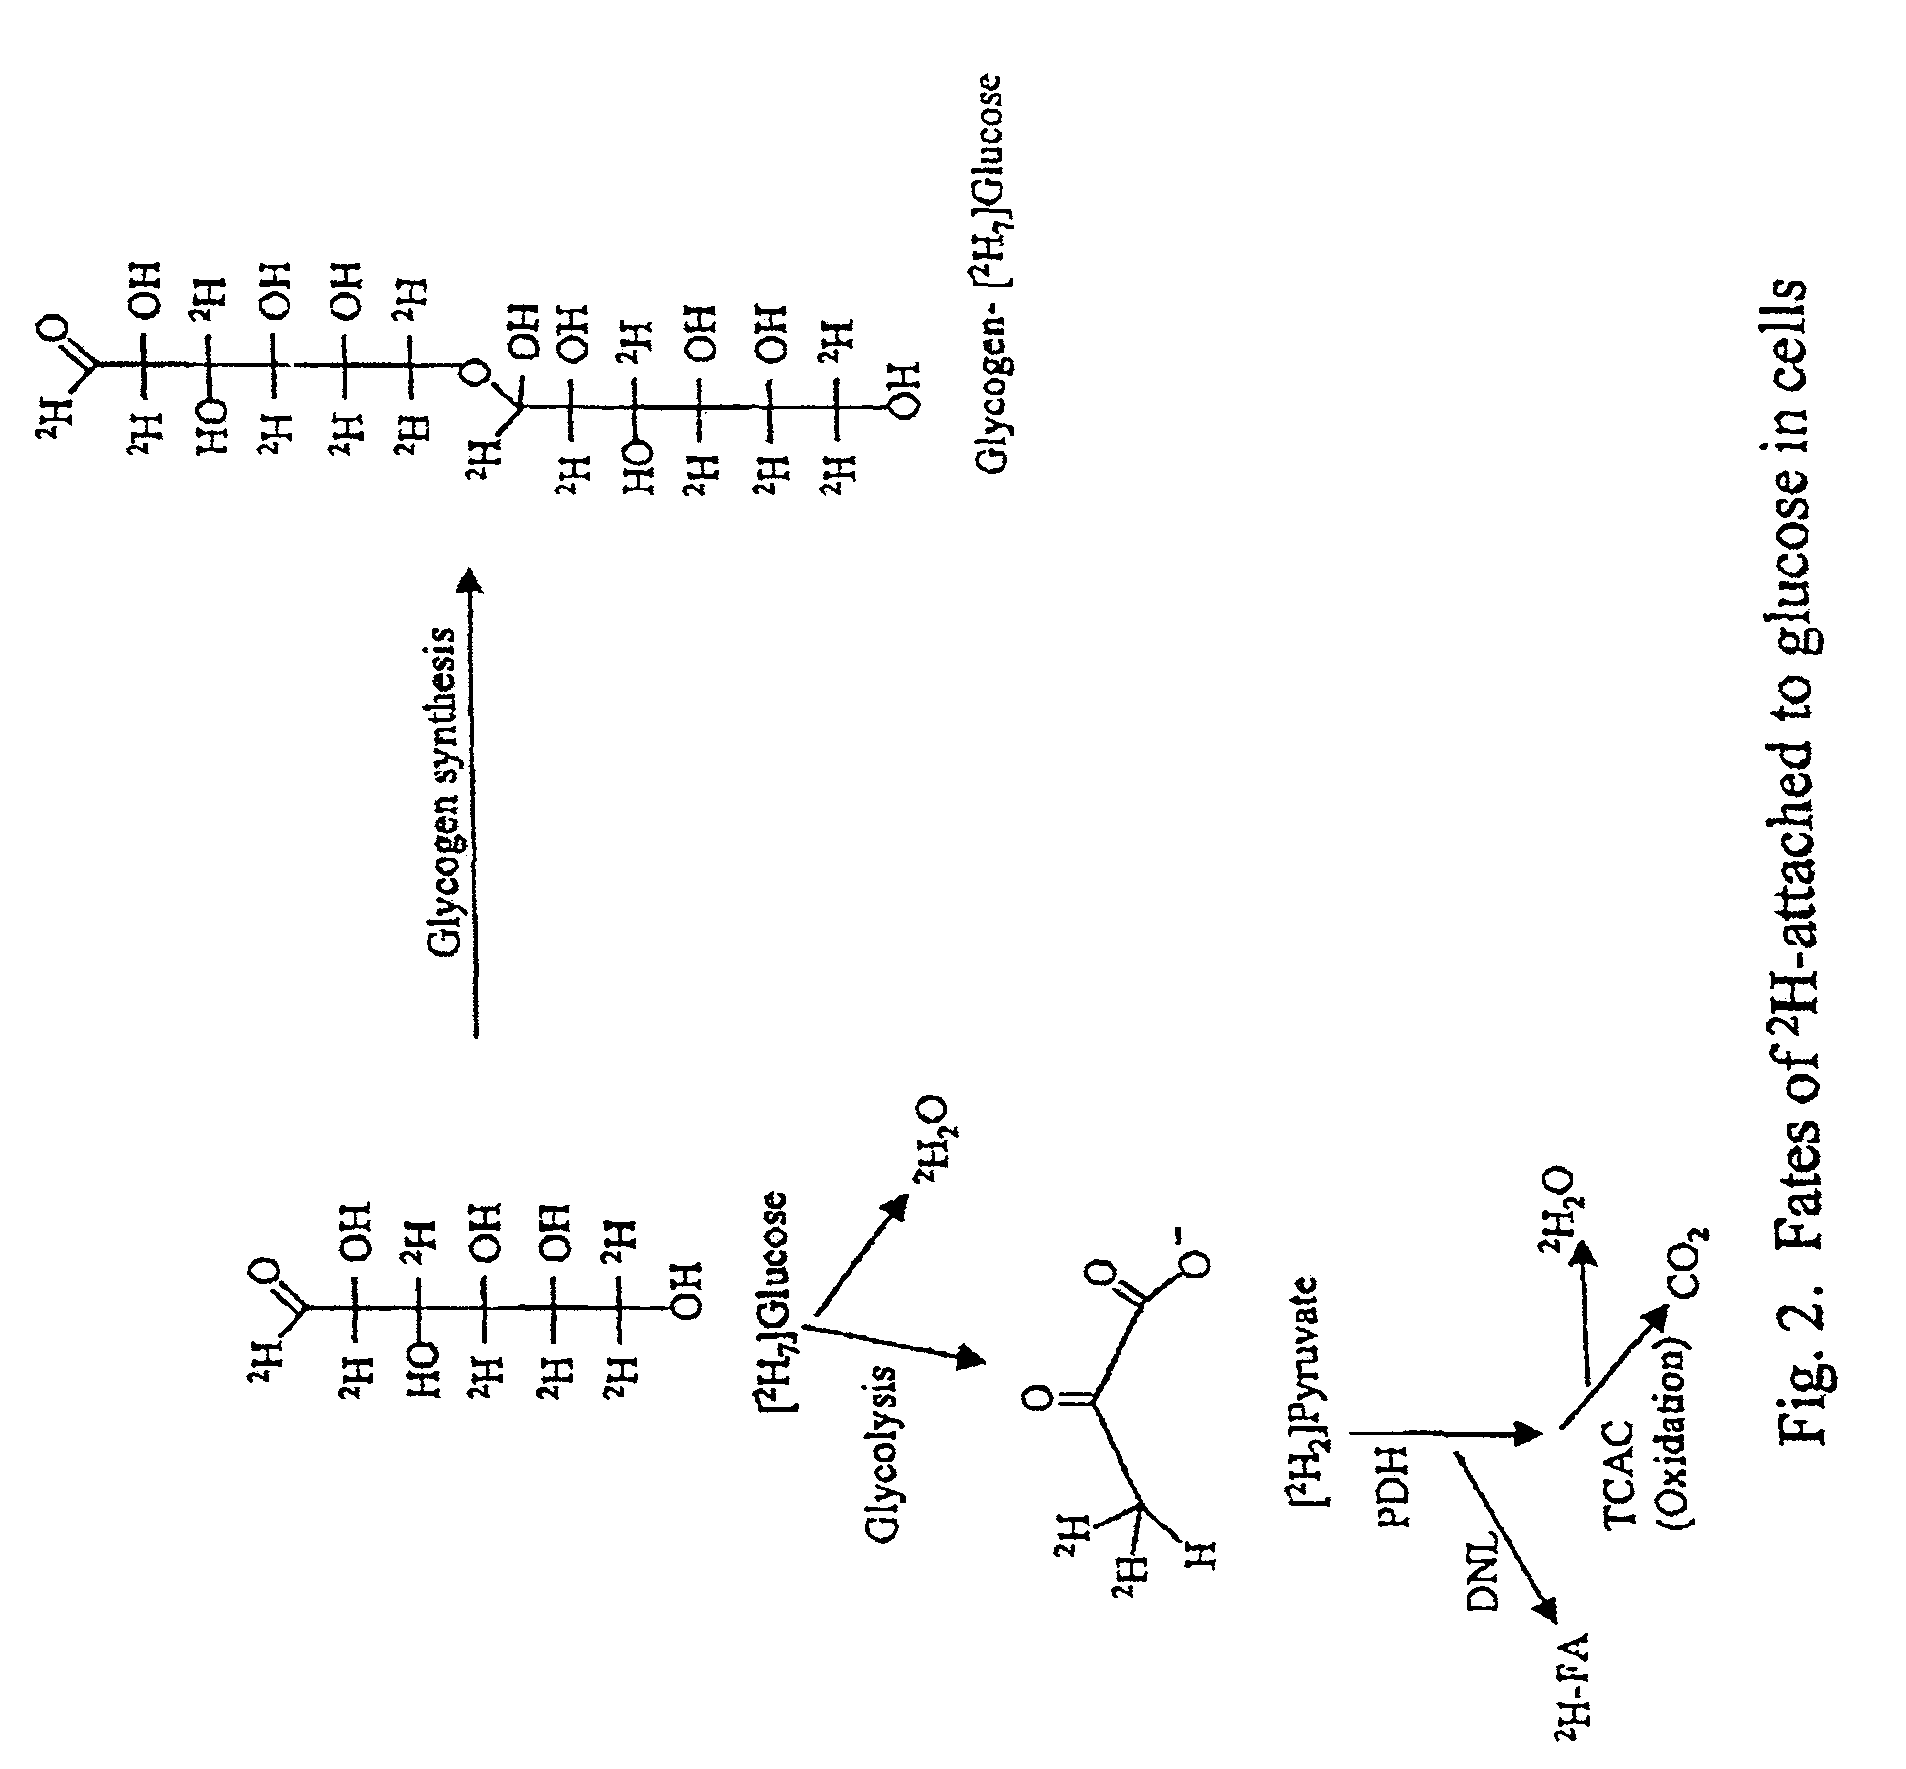 Methods for identifying the effect of a drug agent on the metabolism of sugars and fats in an individual